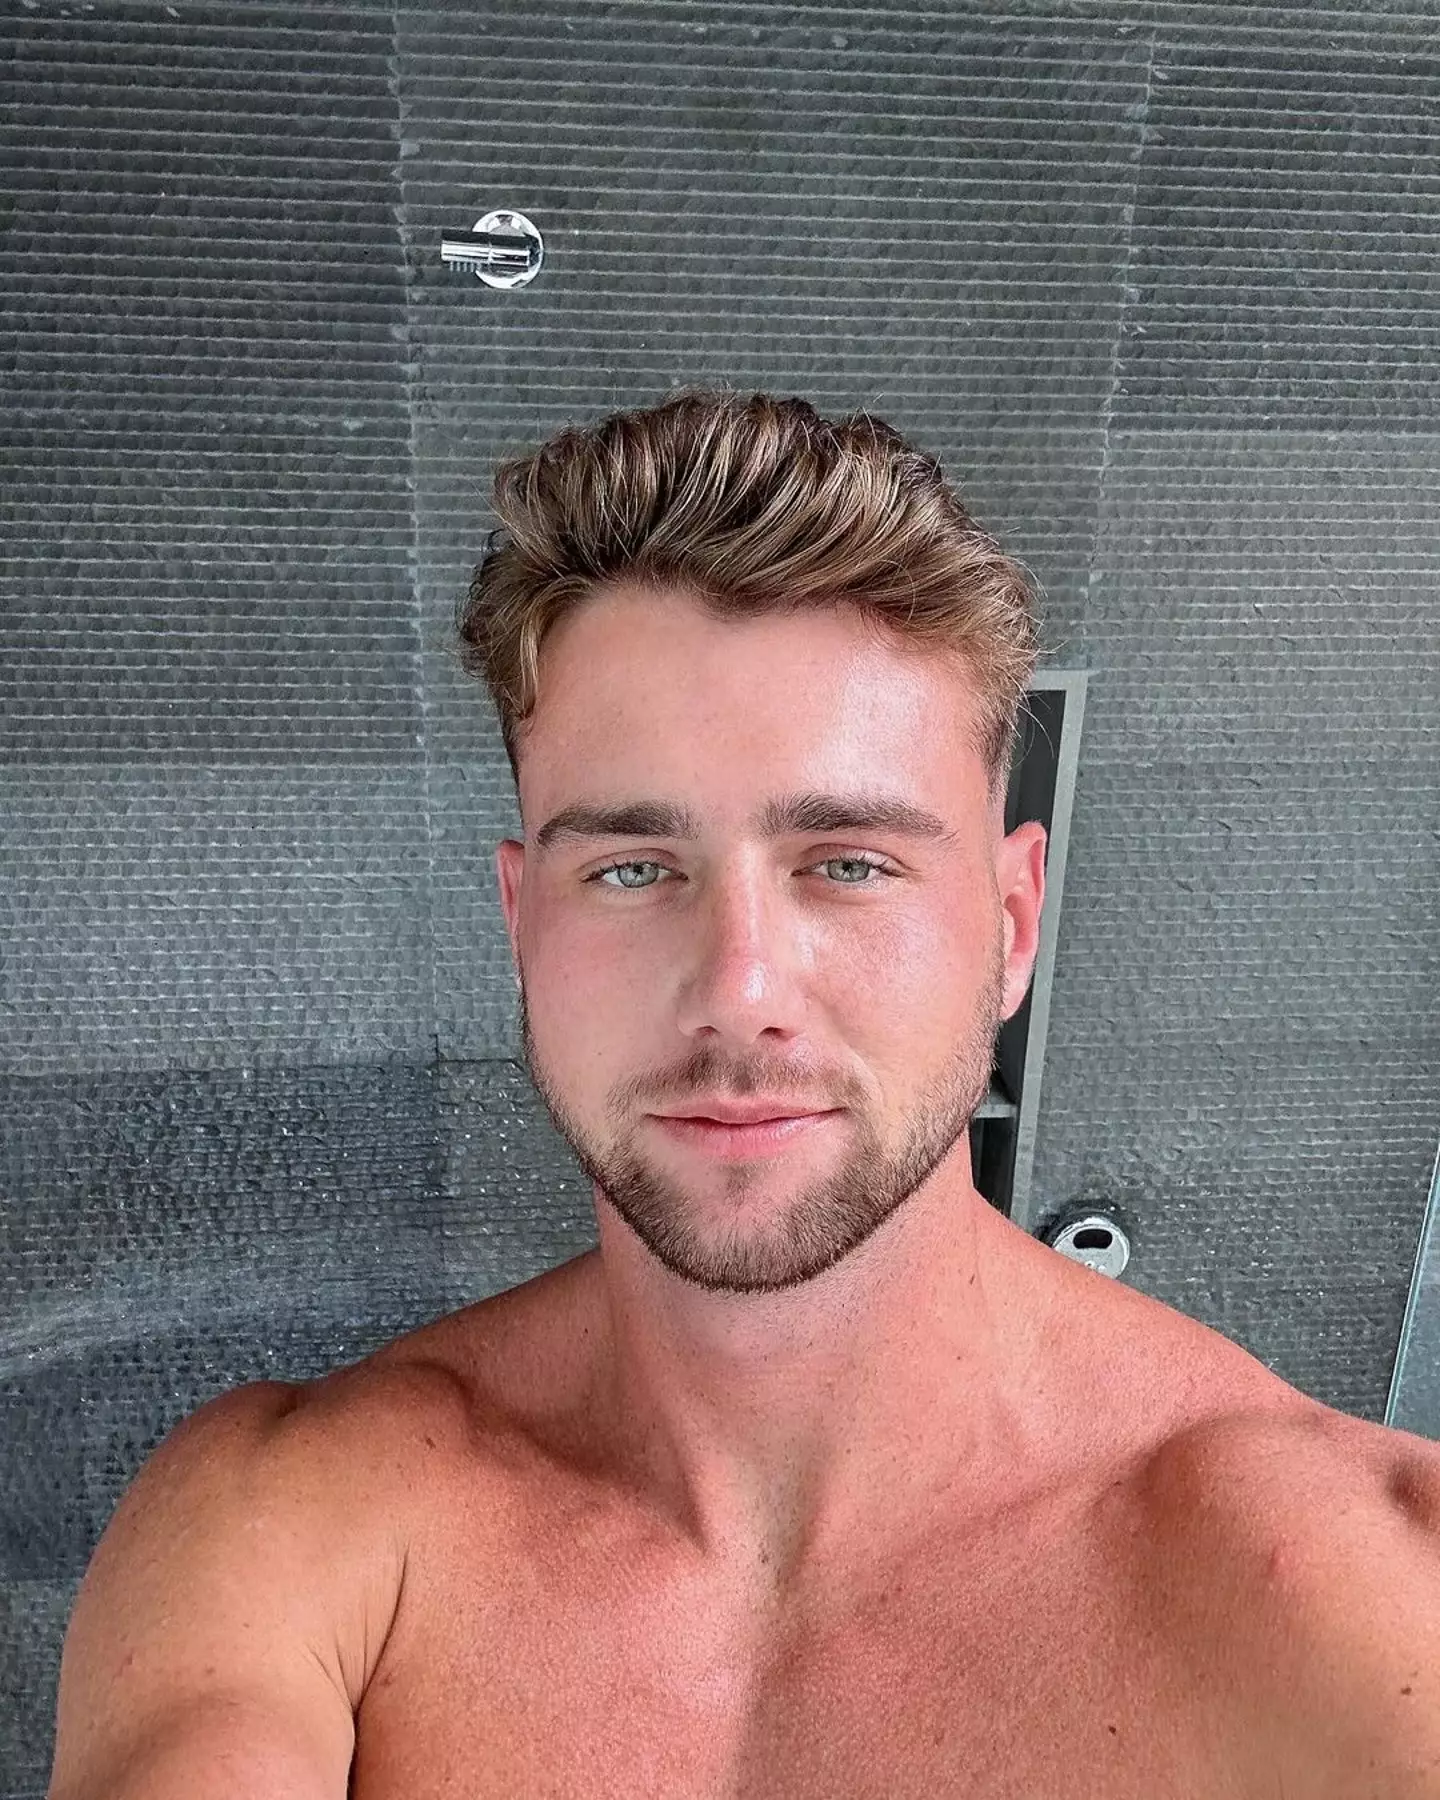 Harry Jowsey revealed he has been diagnosed with skin cancer. (Instagram/@harryjowsey)